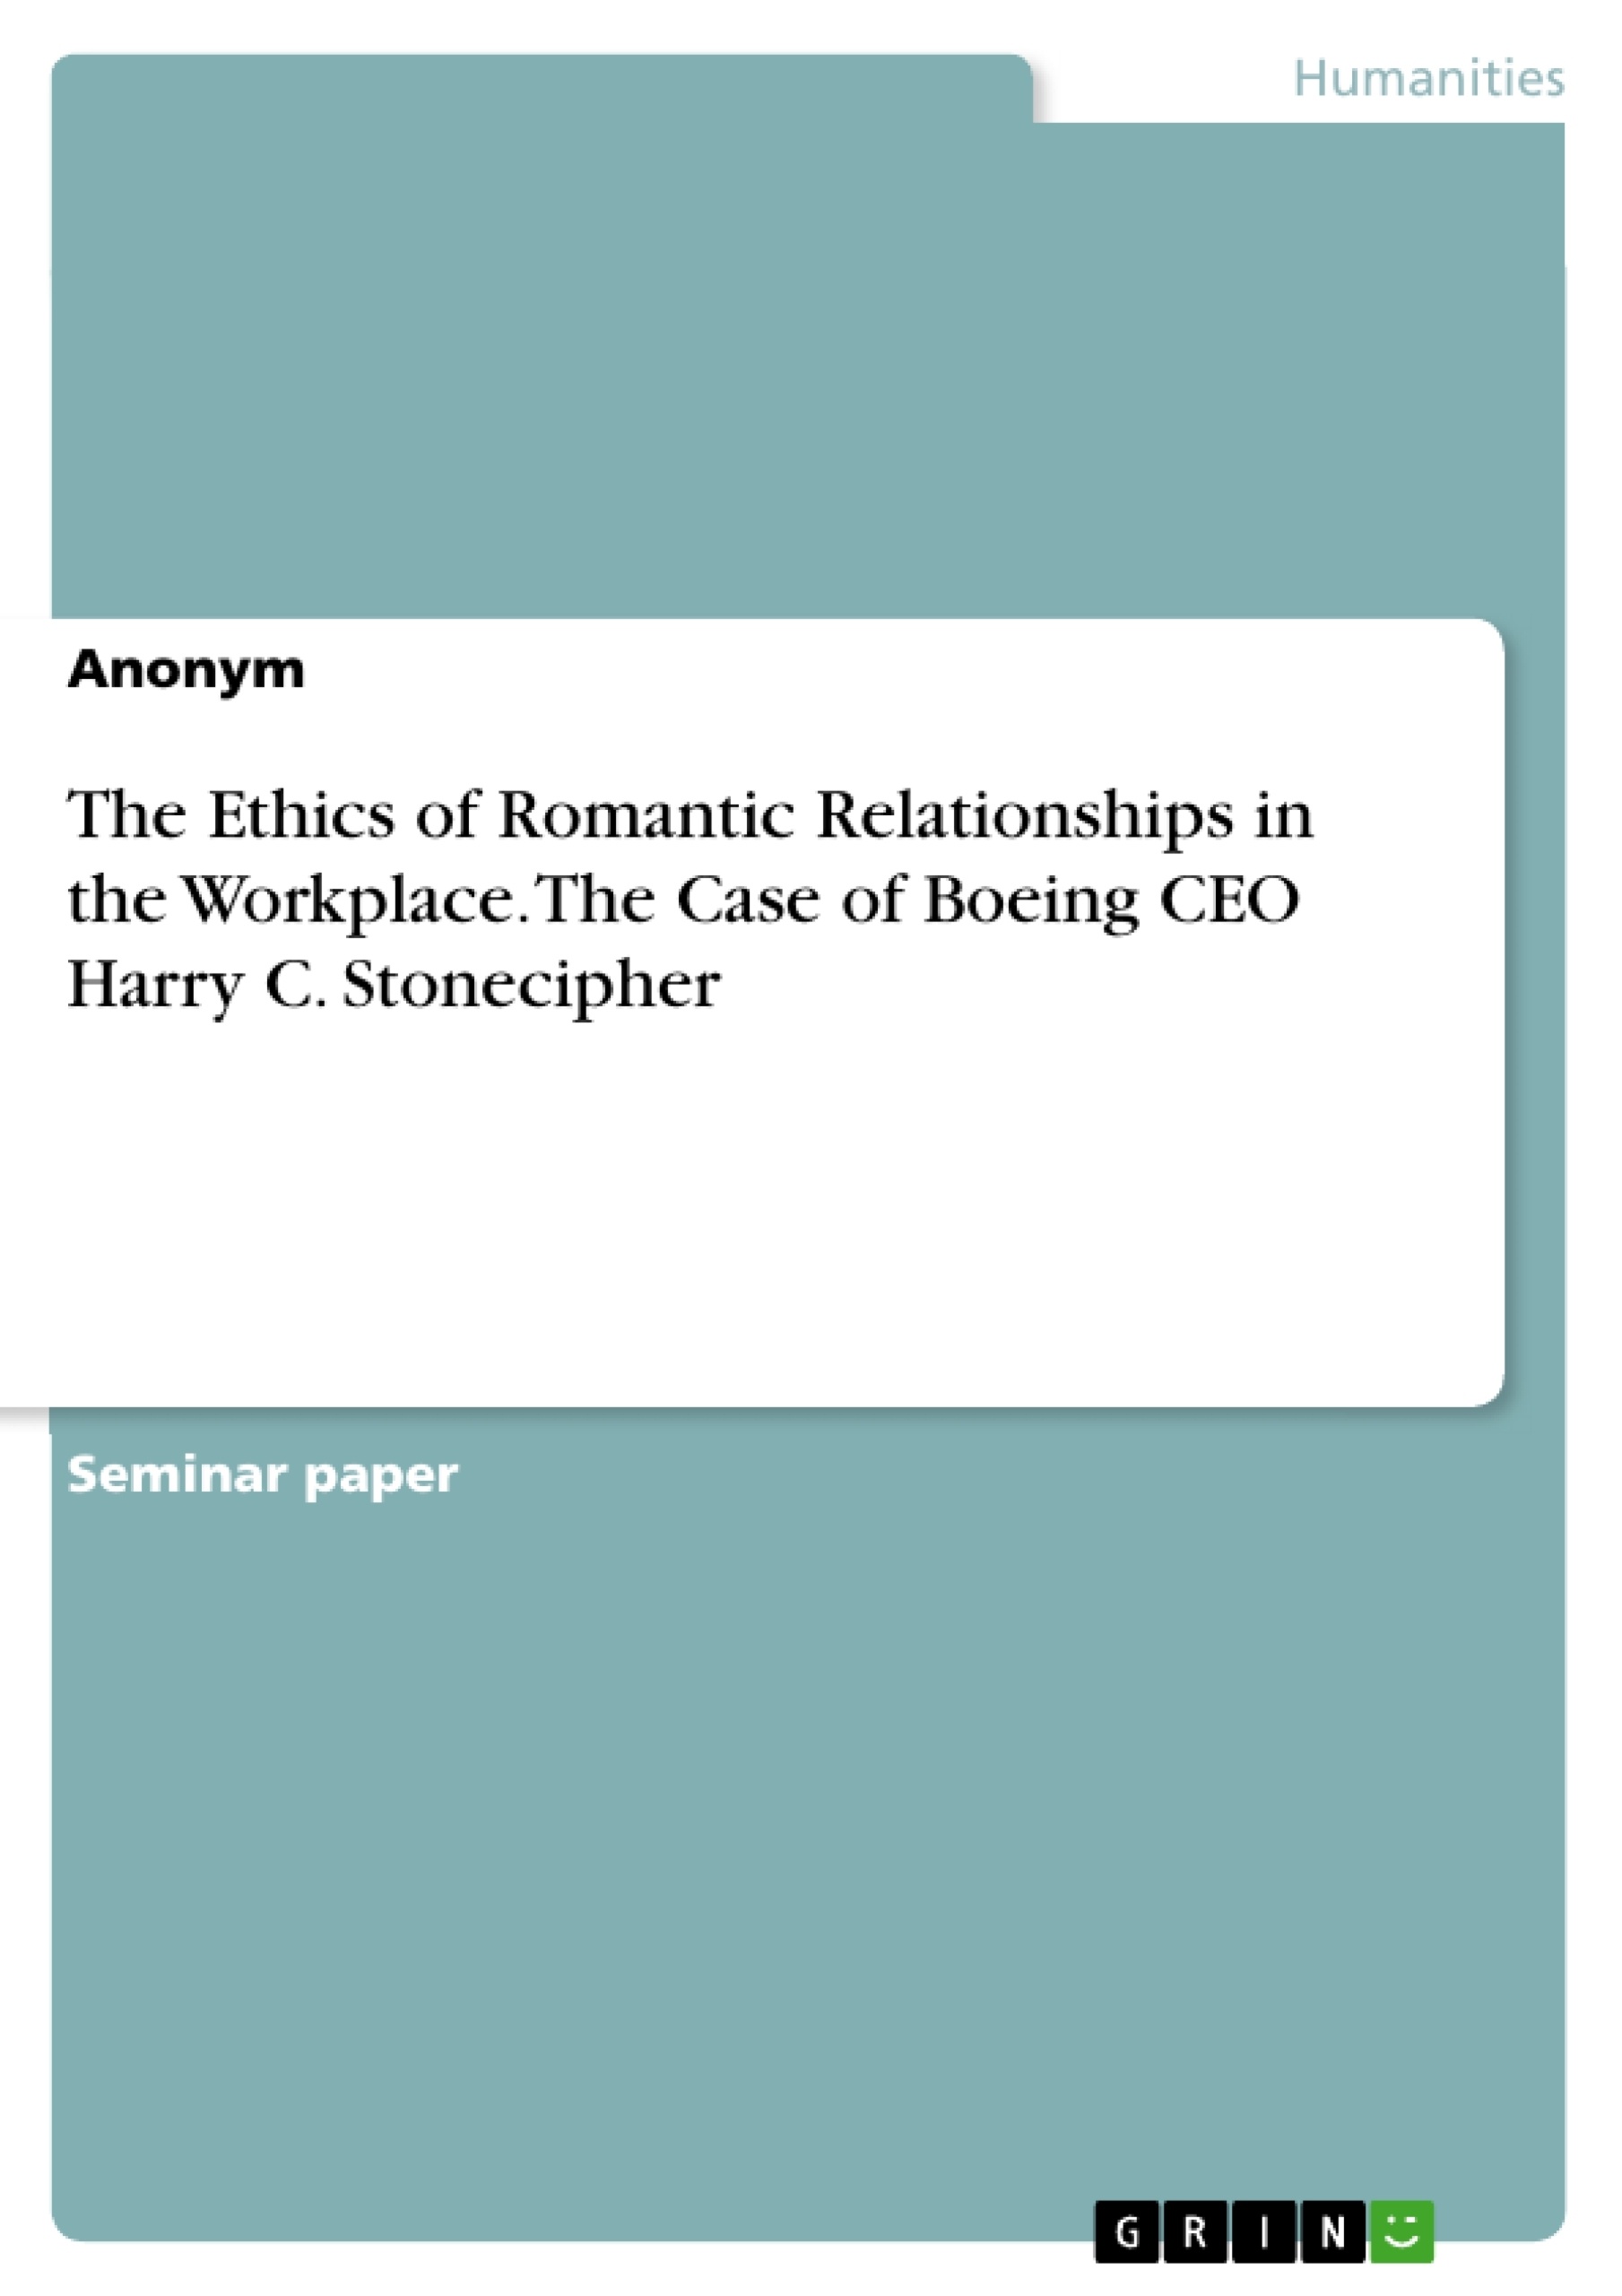 Title: The Ethics of Romantic Relationships in the Workplace. The Case of Boeing CEO Harry C. Stonecipher